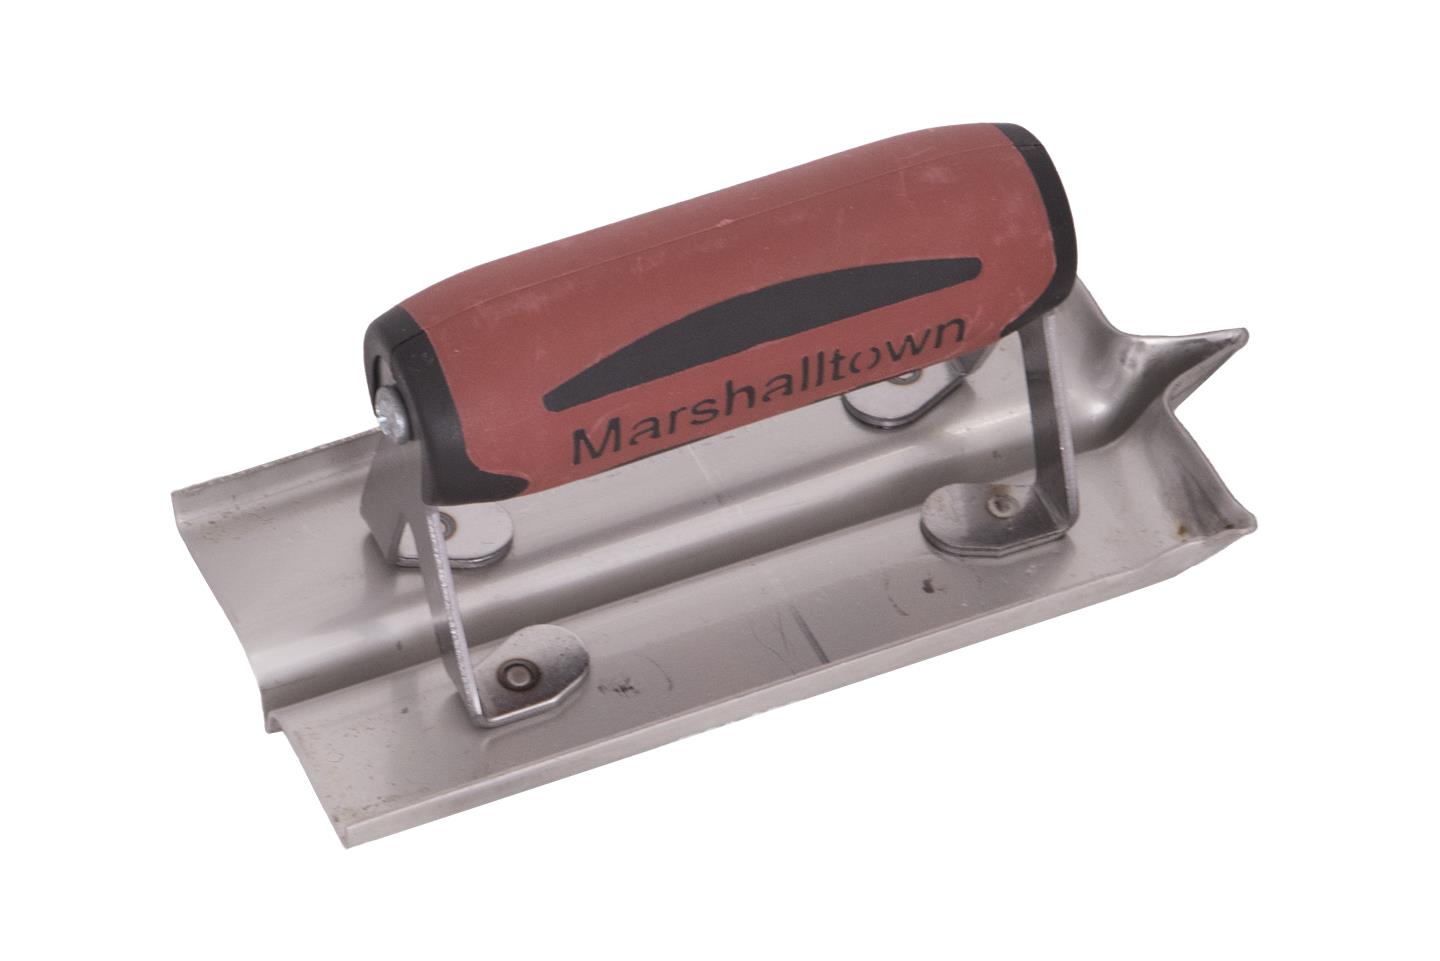 Marshalltown 14102 6 X 3 Stainless Steel Groover-1-2 X 1-2 Groove-DS Handle